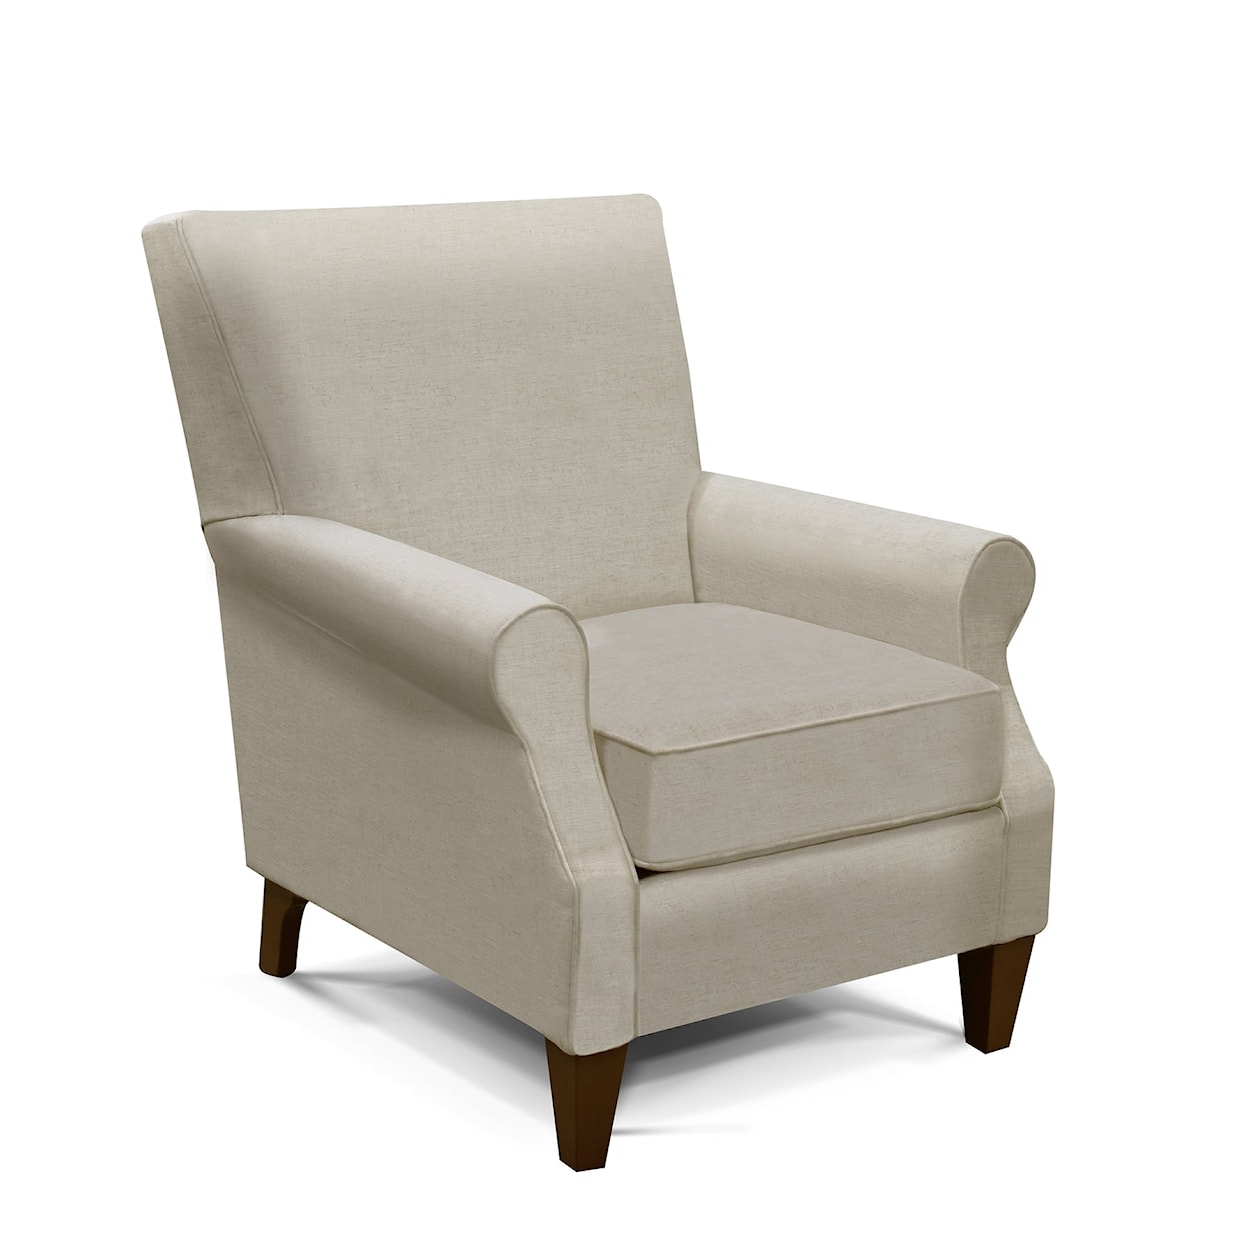 Dimensions Metromix - East Side Accent Chair